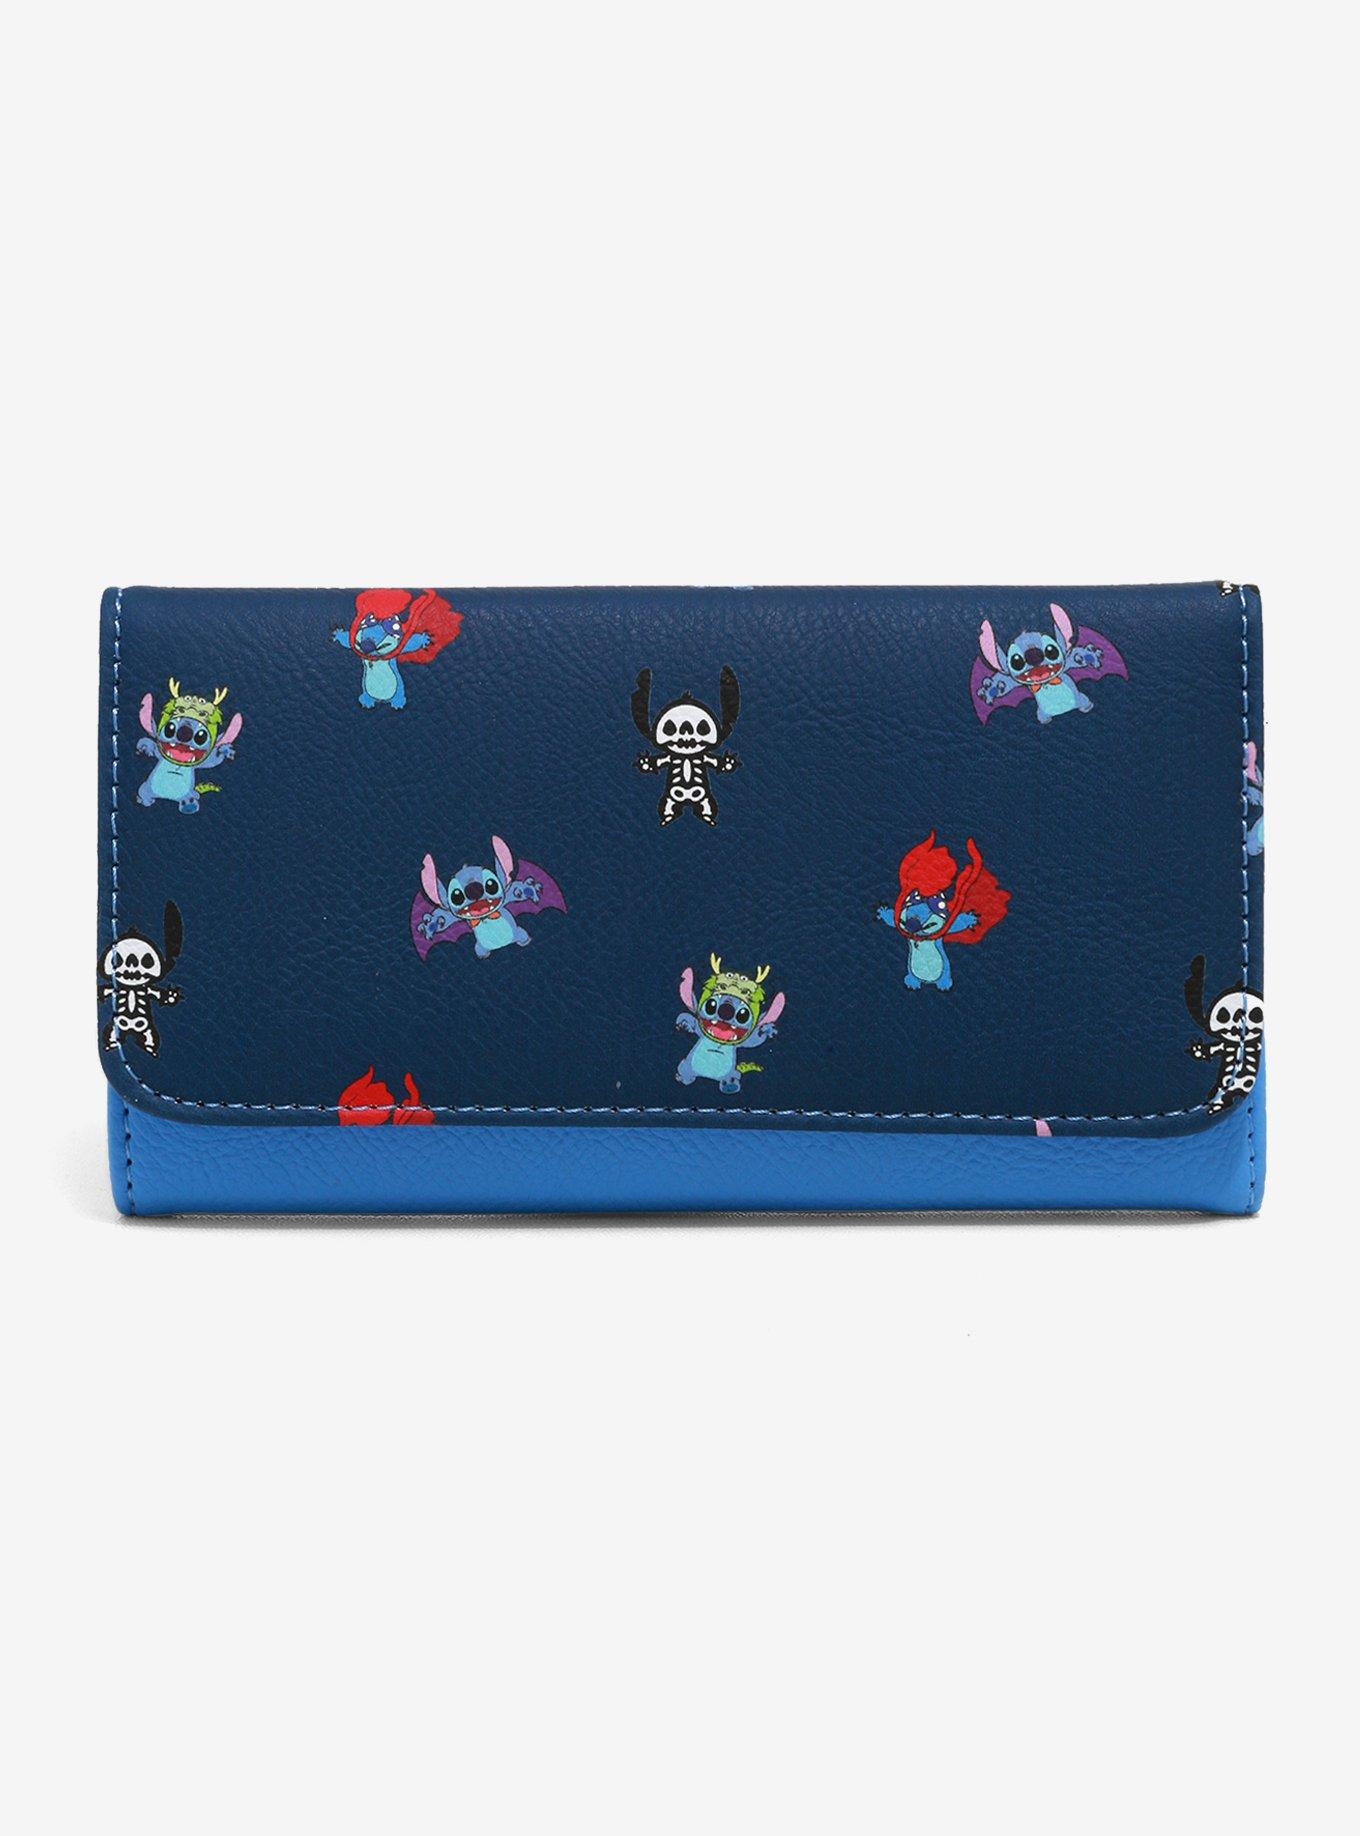 Loungefly Disney Lilo & Stitch Costumes Flap Wallet, , hi-res